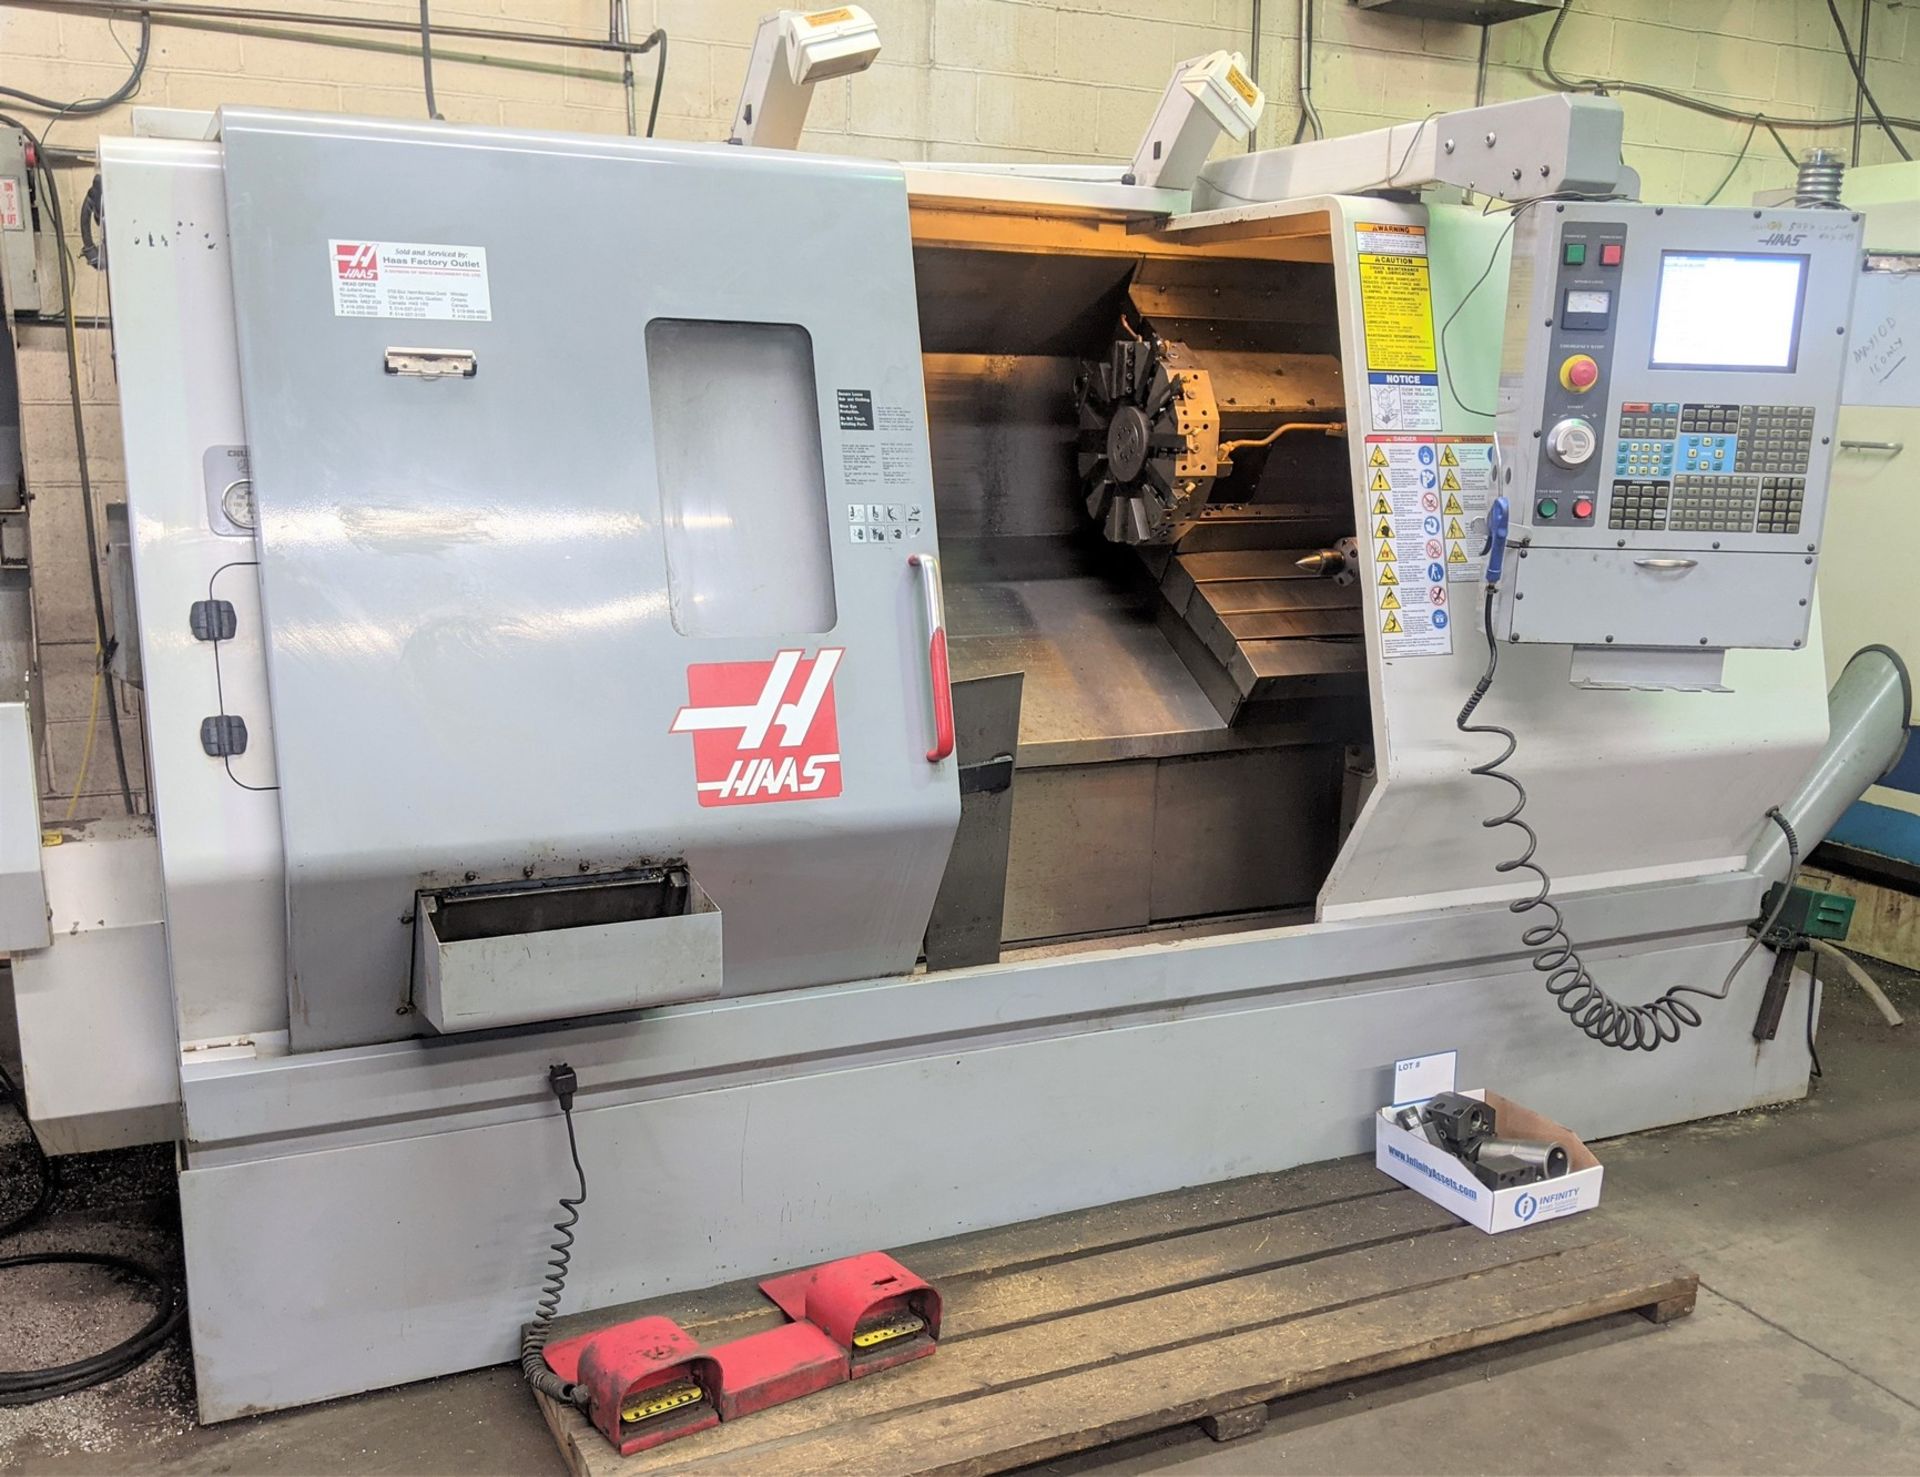 2005 HAAS SL-30T CNC LATHE, CNC CONTROL, 10” 3-JAW CHUCK, TAILSTOCK, TOOL PRESETTER, 12-STATION - Image 4 of 27